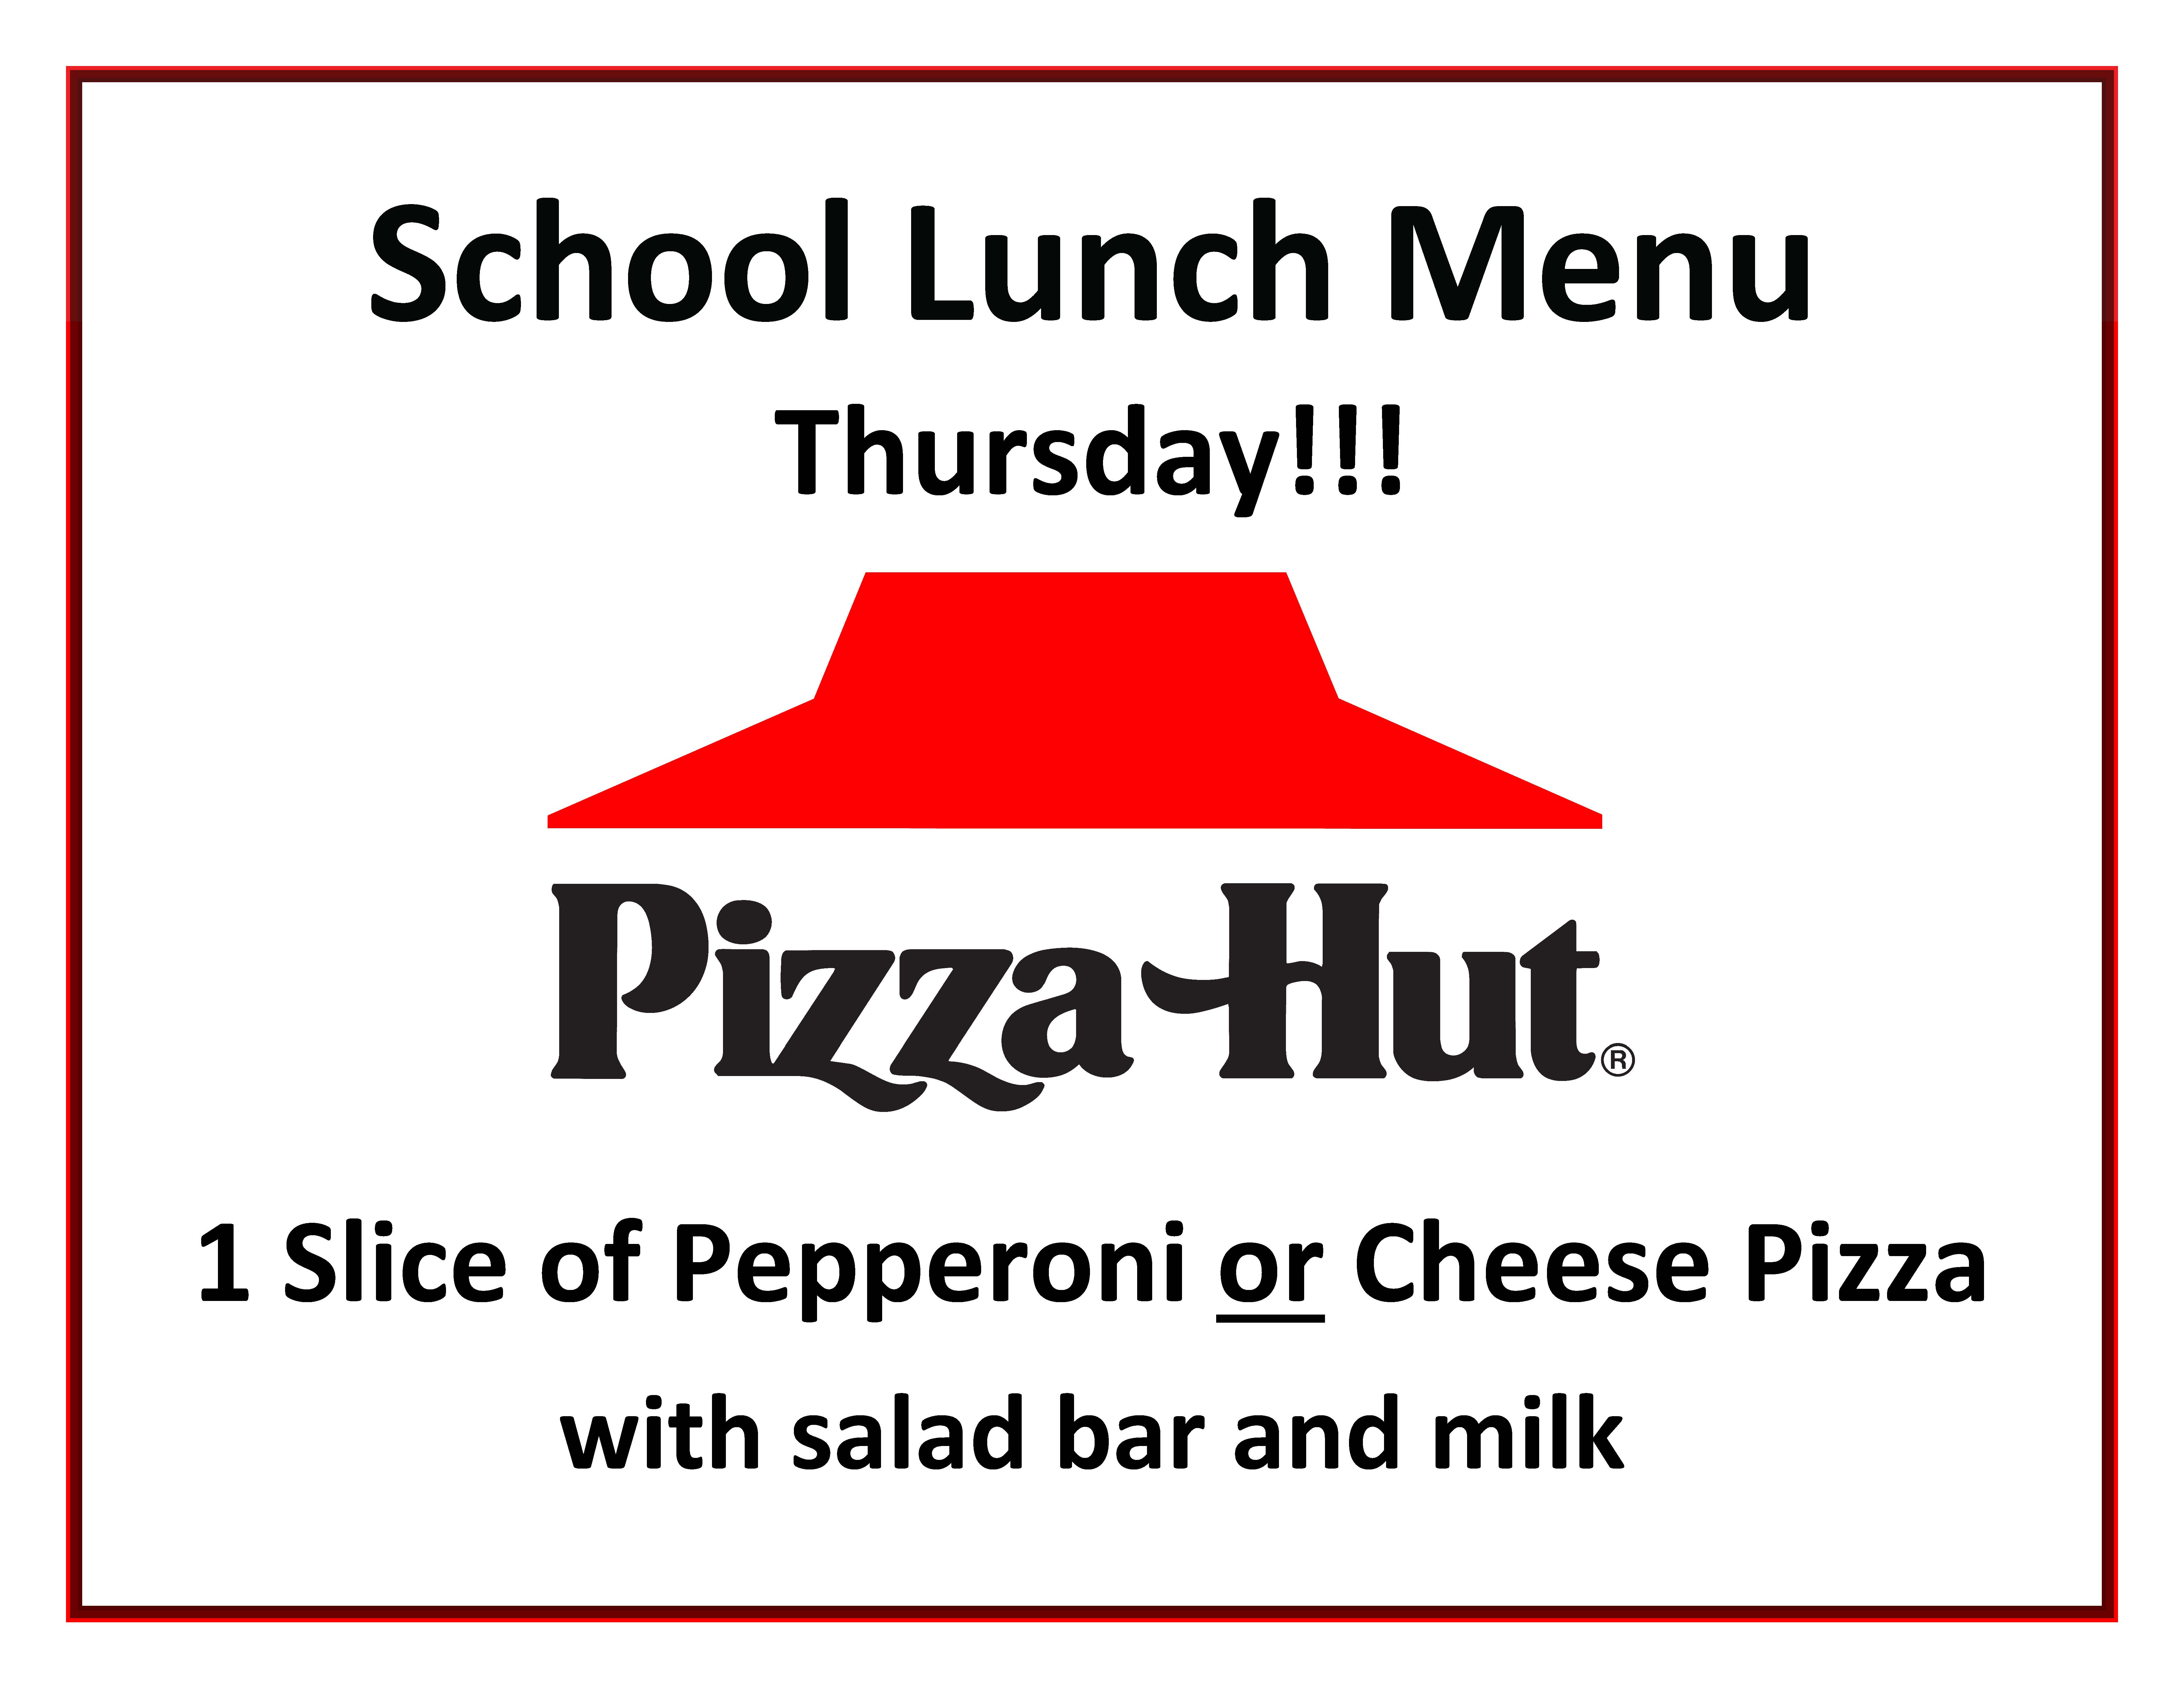 Pizza Hut Day in the school cafeteria - May 9